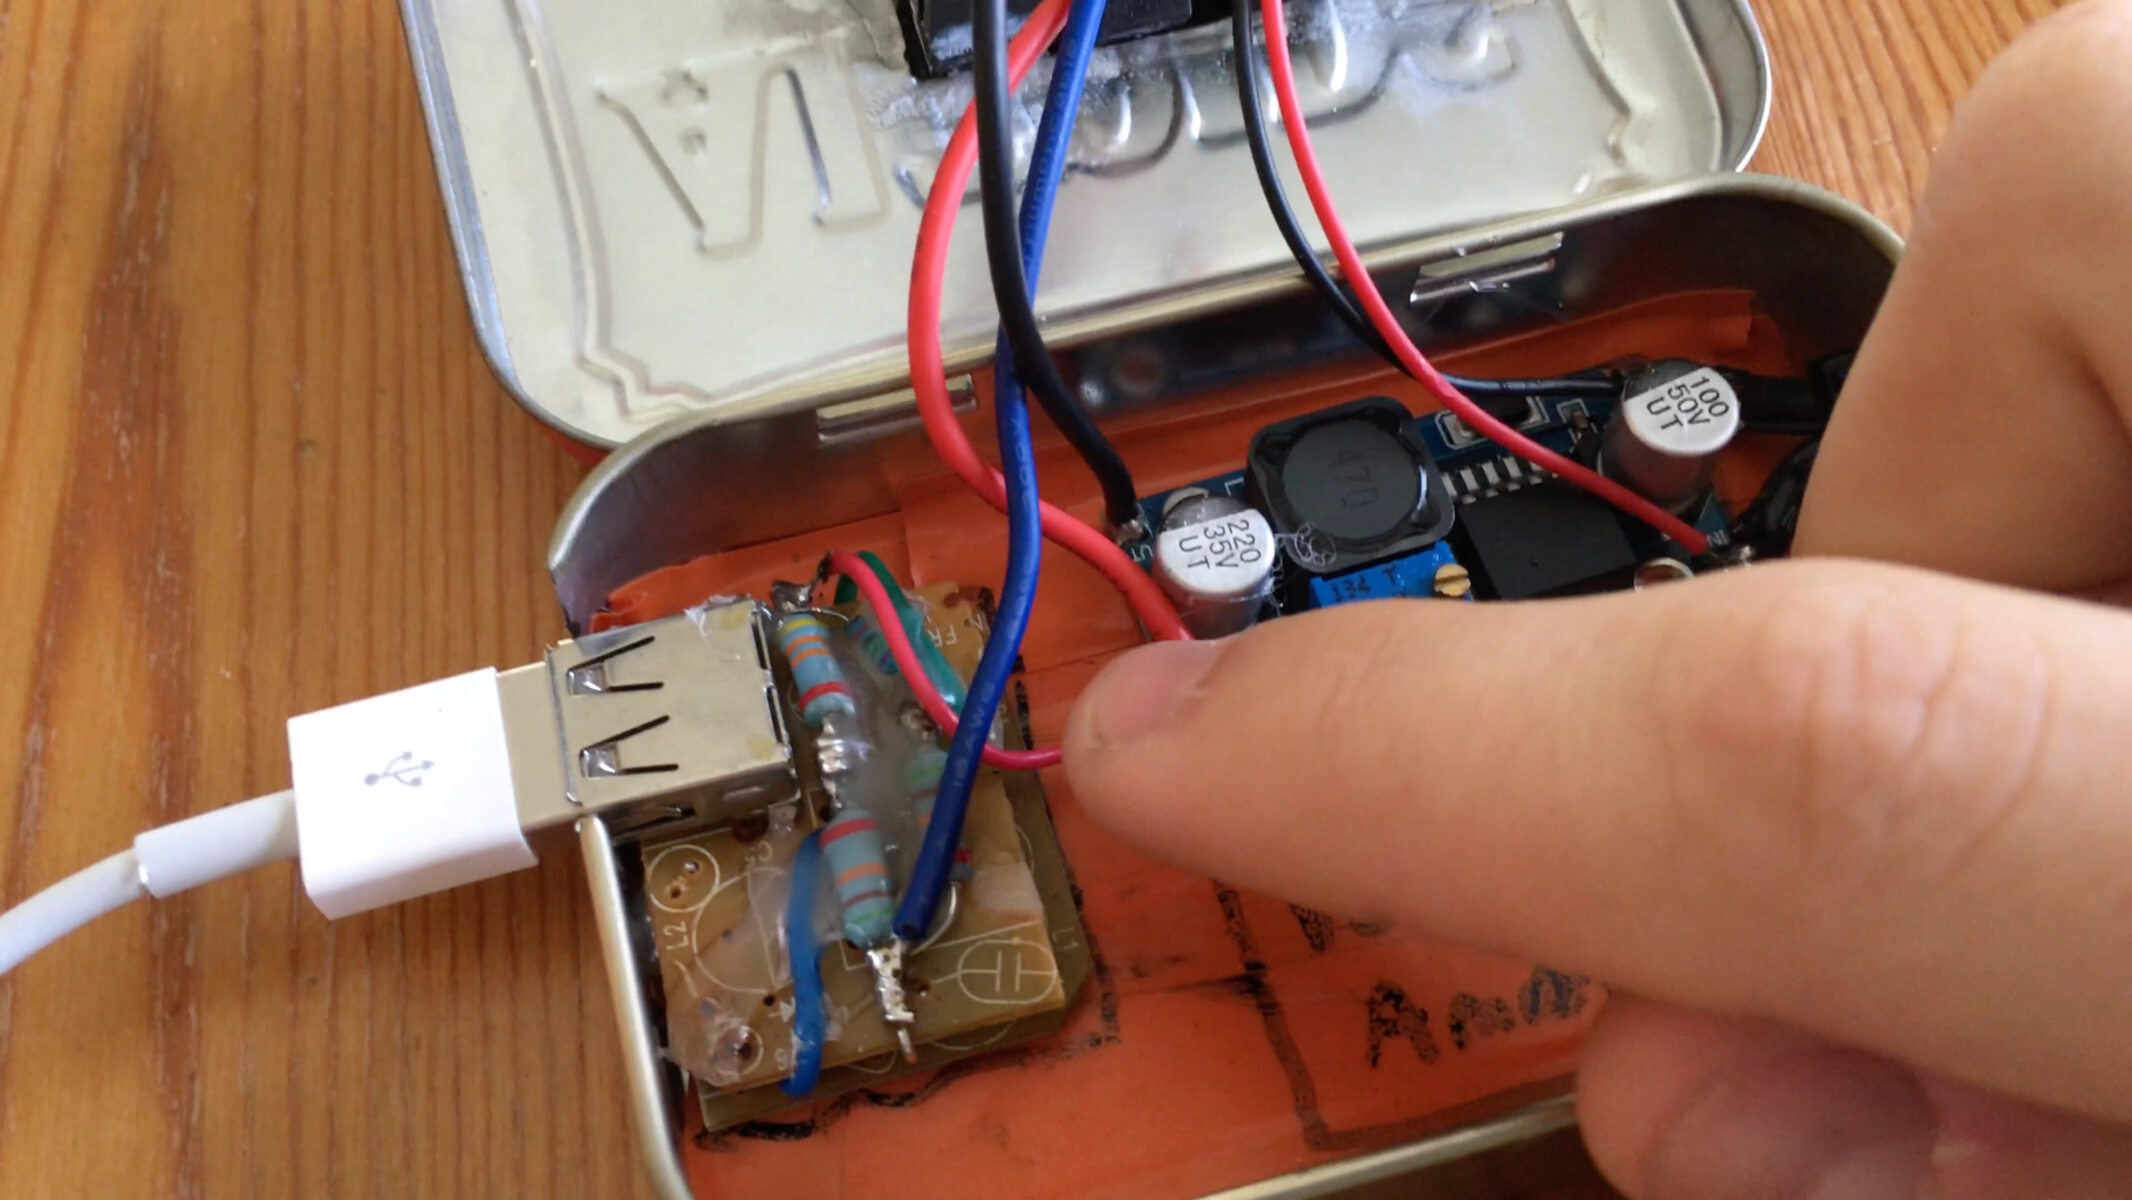 Crafting An Altoids USB Charger: DIY Project